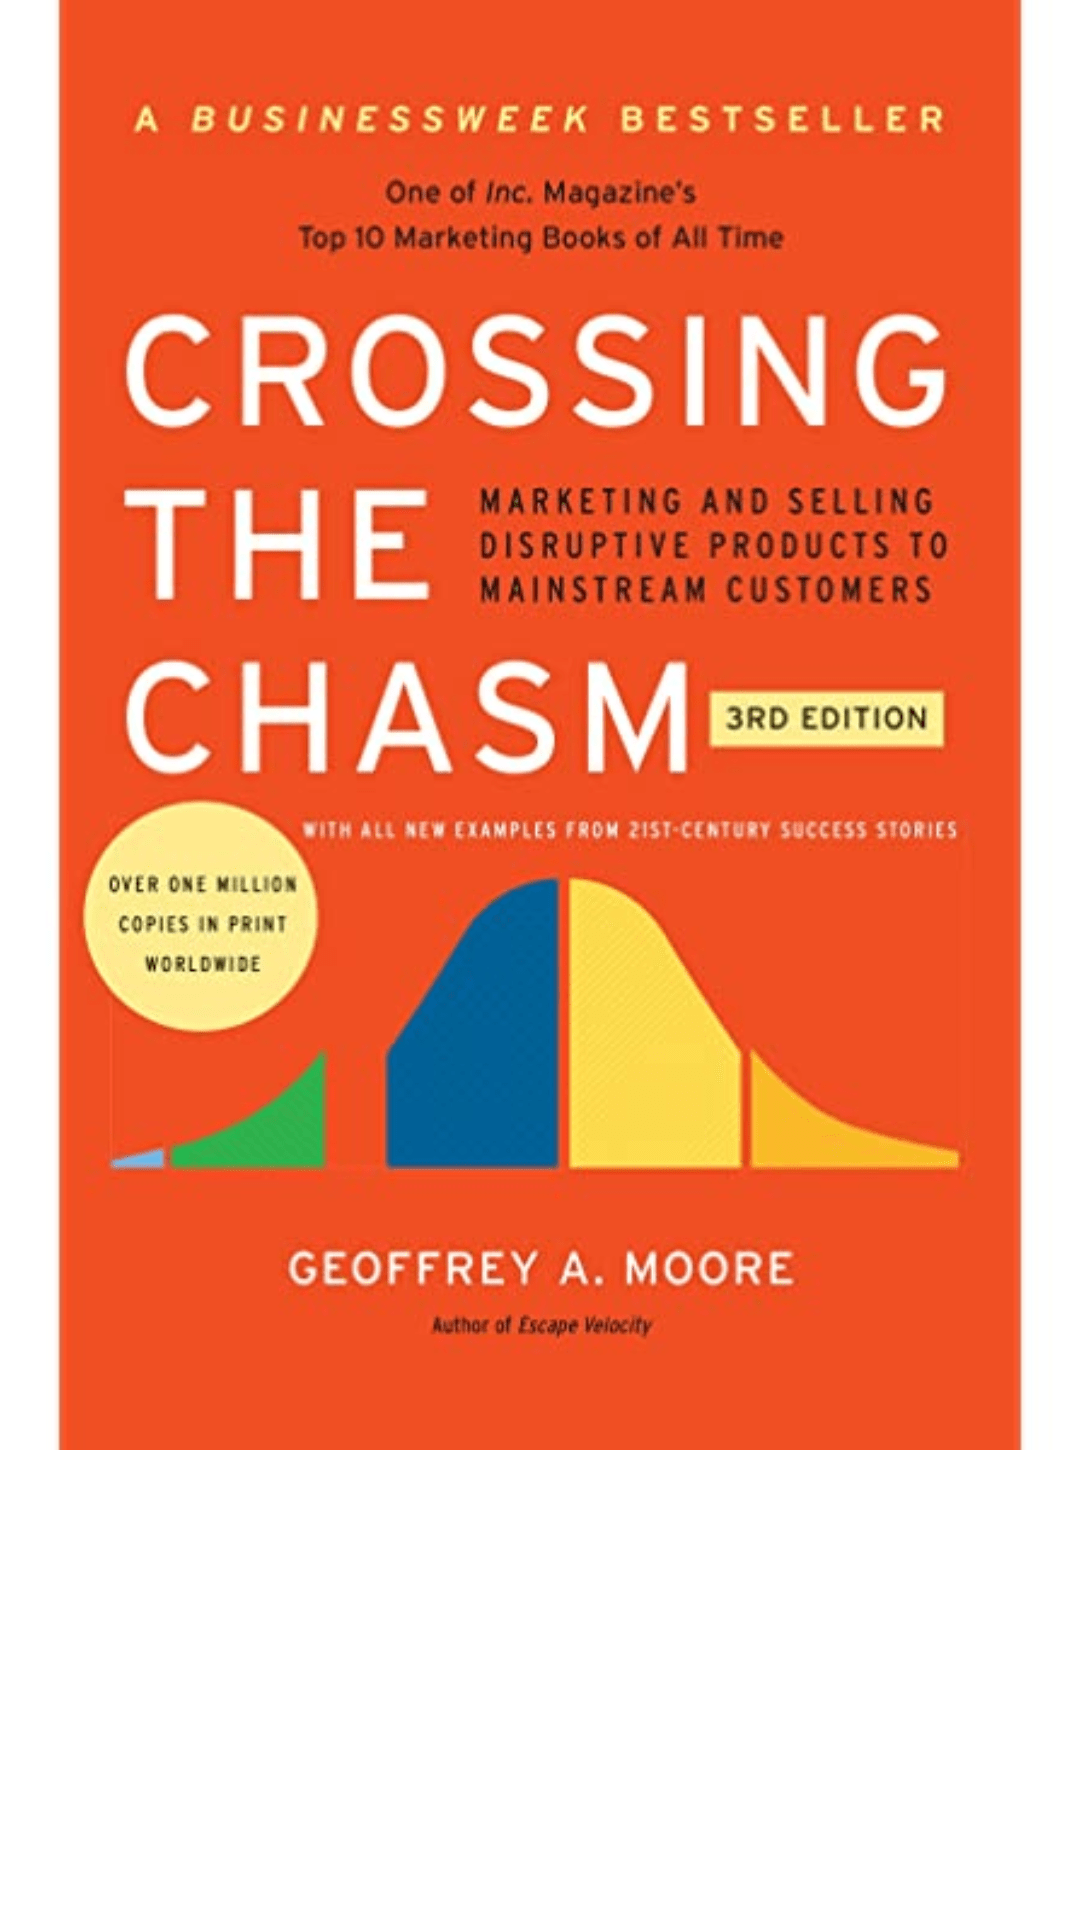 Crossing the Chasm : Marketing and Selling High-tech Products to Mainstream Customers